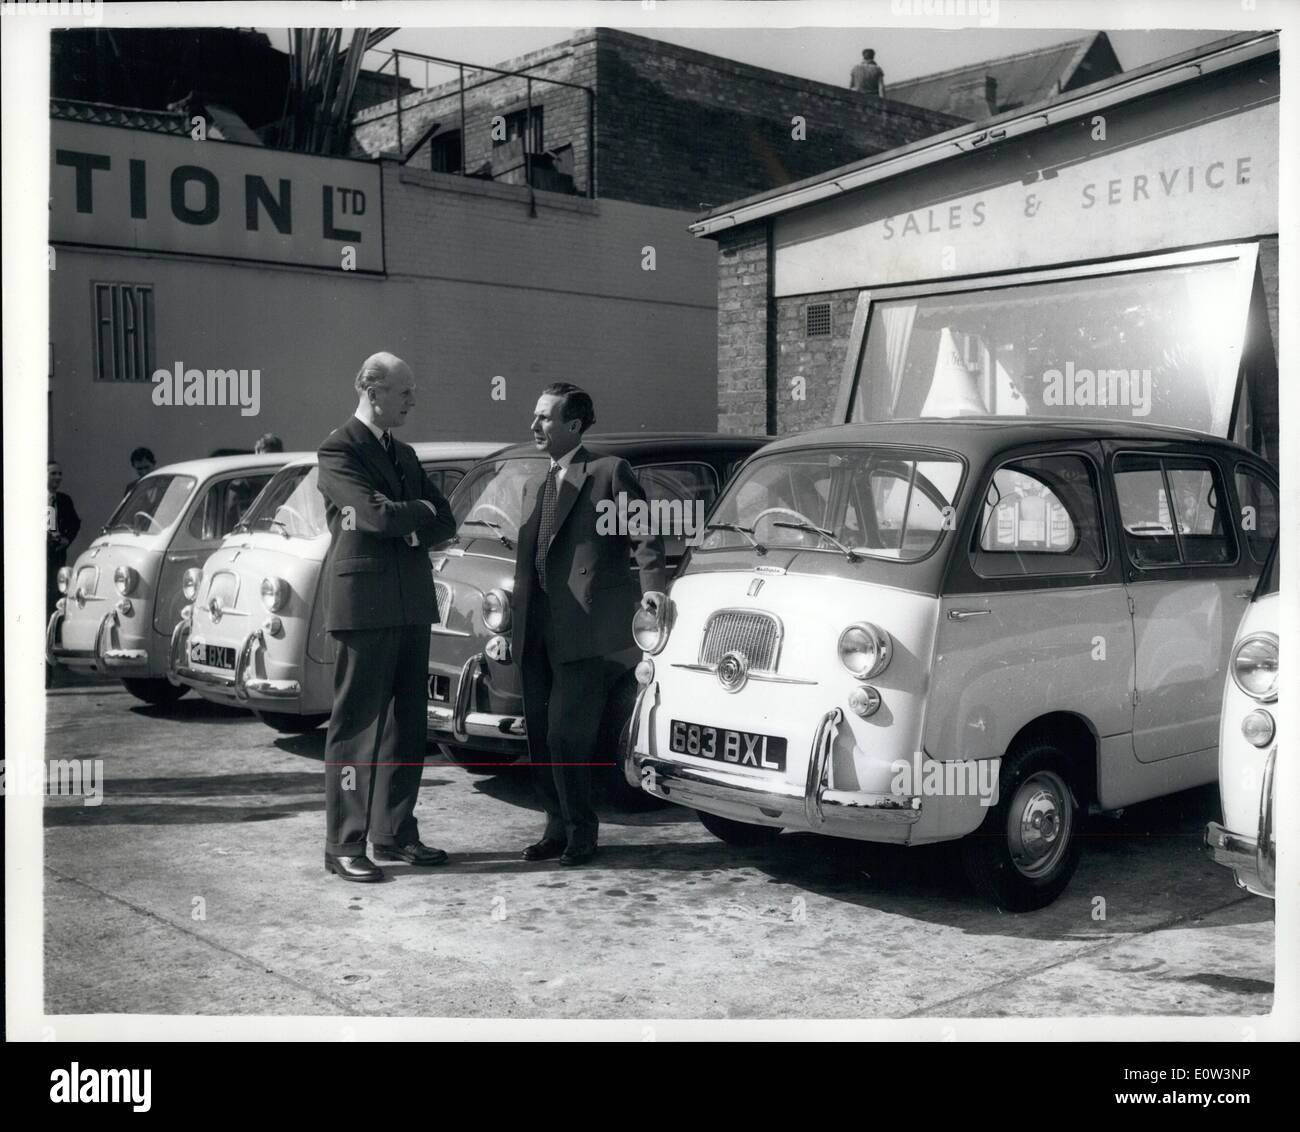 Mar. 03, 1961 - London's first mini cabs ready for services flat 600 G. C. Vehicles.: London's first ''mini-cabs'' were to be seen at a Vauxhall Bridge road, service station this morning. The Sylvester car hire company is to start a service on Monday with a fleet of 25 flat. Multiplas radio- controlled cabs on Monday and augment the fleet by five a week. He plans to charge 1/6d, for first mile plus 1/- each additional miles. The cabs will not play for hire- but will have to carry only two passengers. No extra charge will be made for luggage. Photo shows Mr Stock Photo